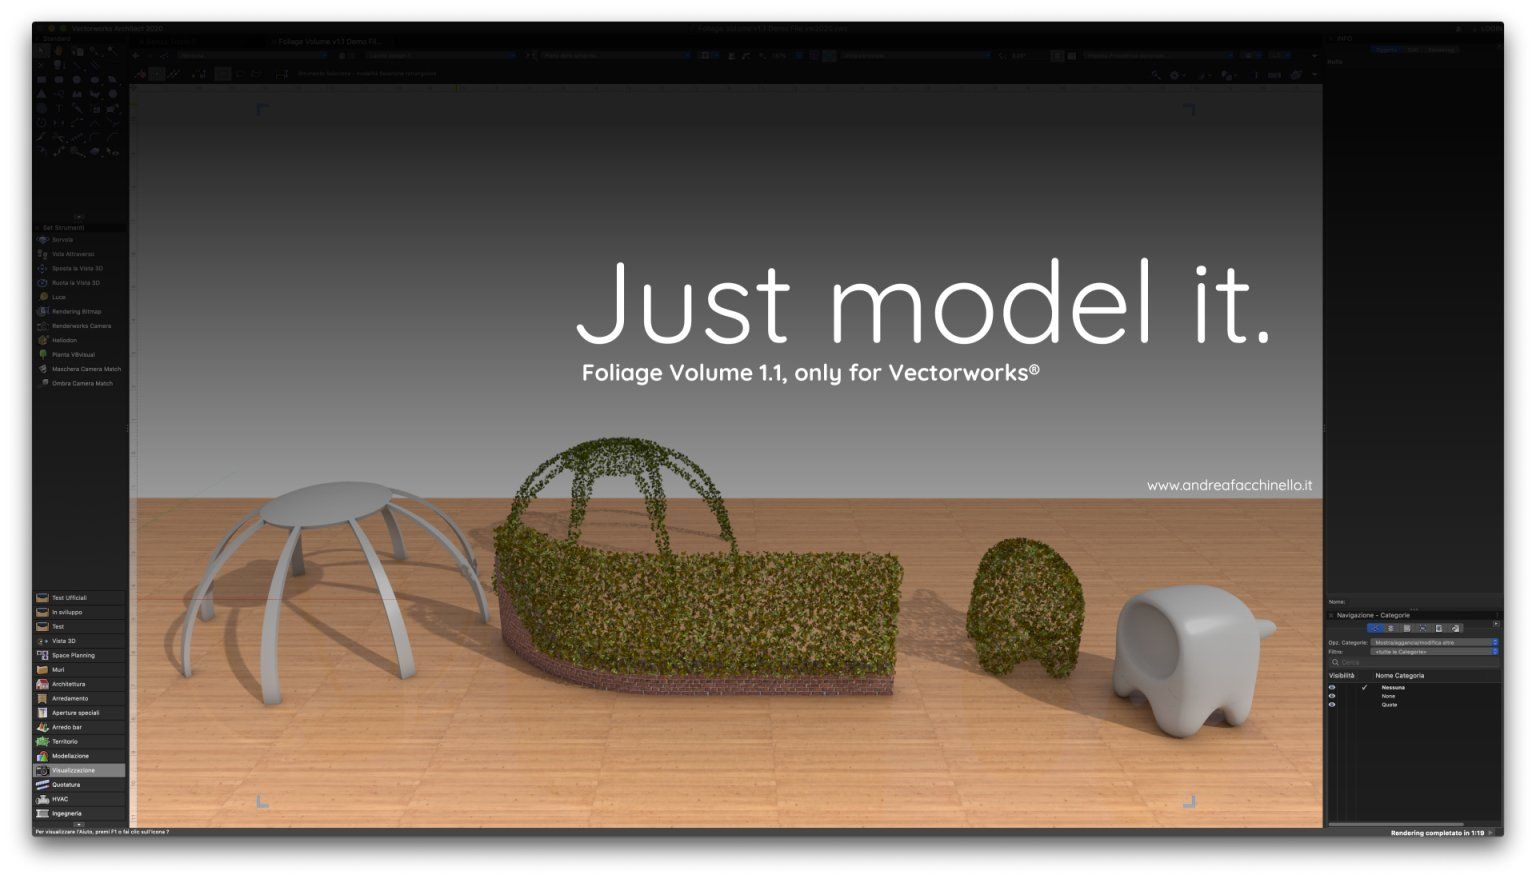 3D models with two wrapped in foliage element with words “Just model it” and Foliage Volume 1.1, only for Vectorworks” above them